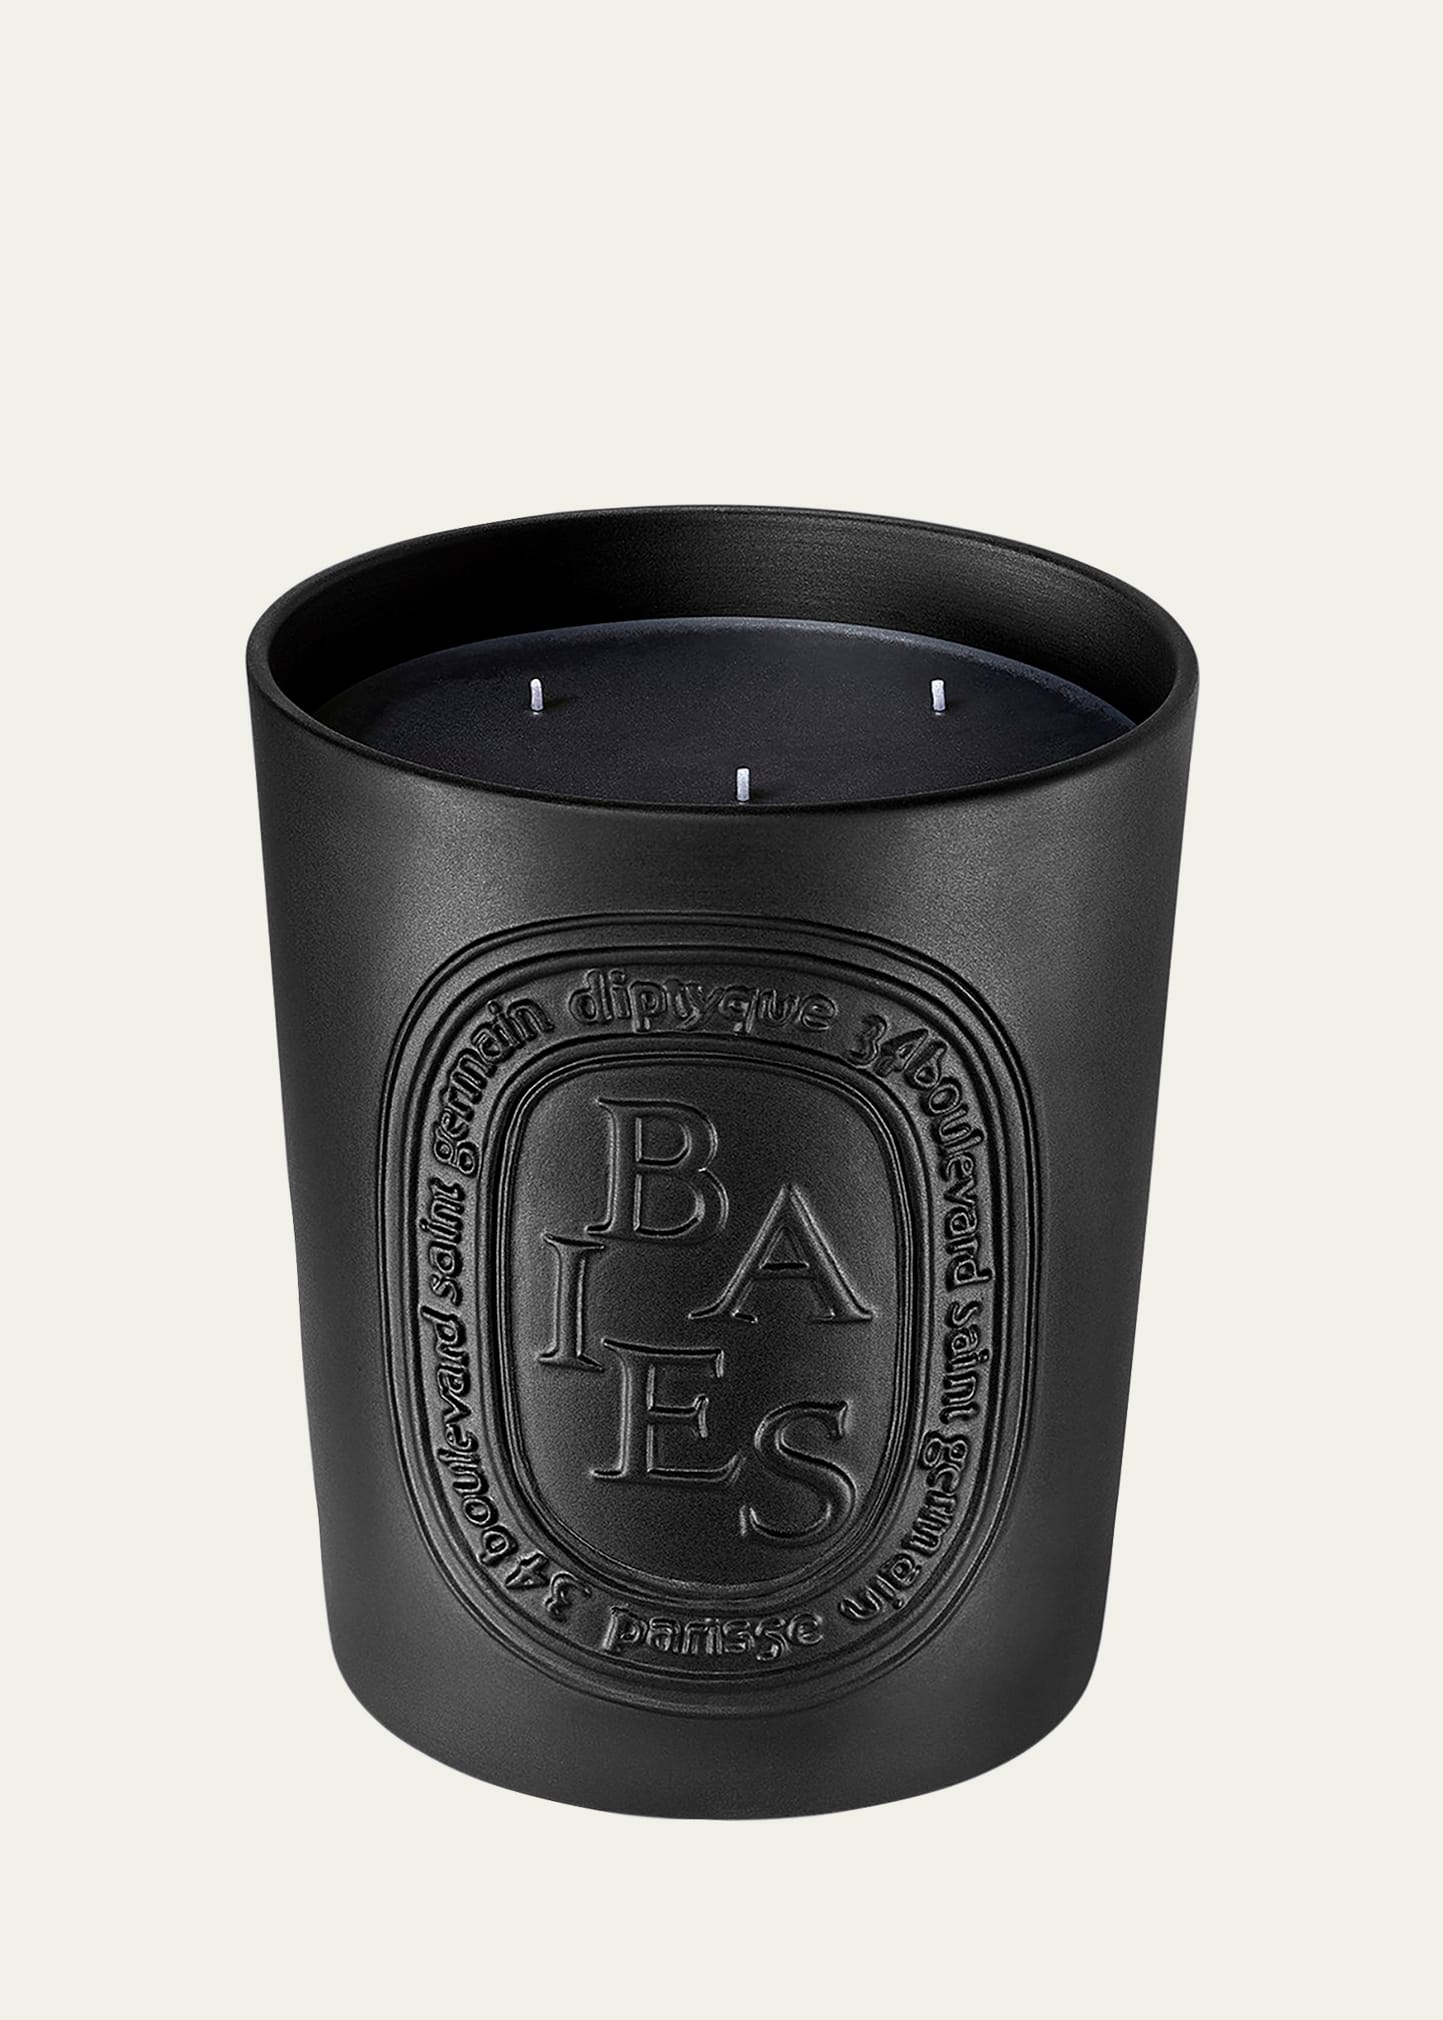 DIPTYQUE Baies (Berries) Scented Candle, 21.2 oz.